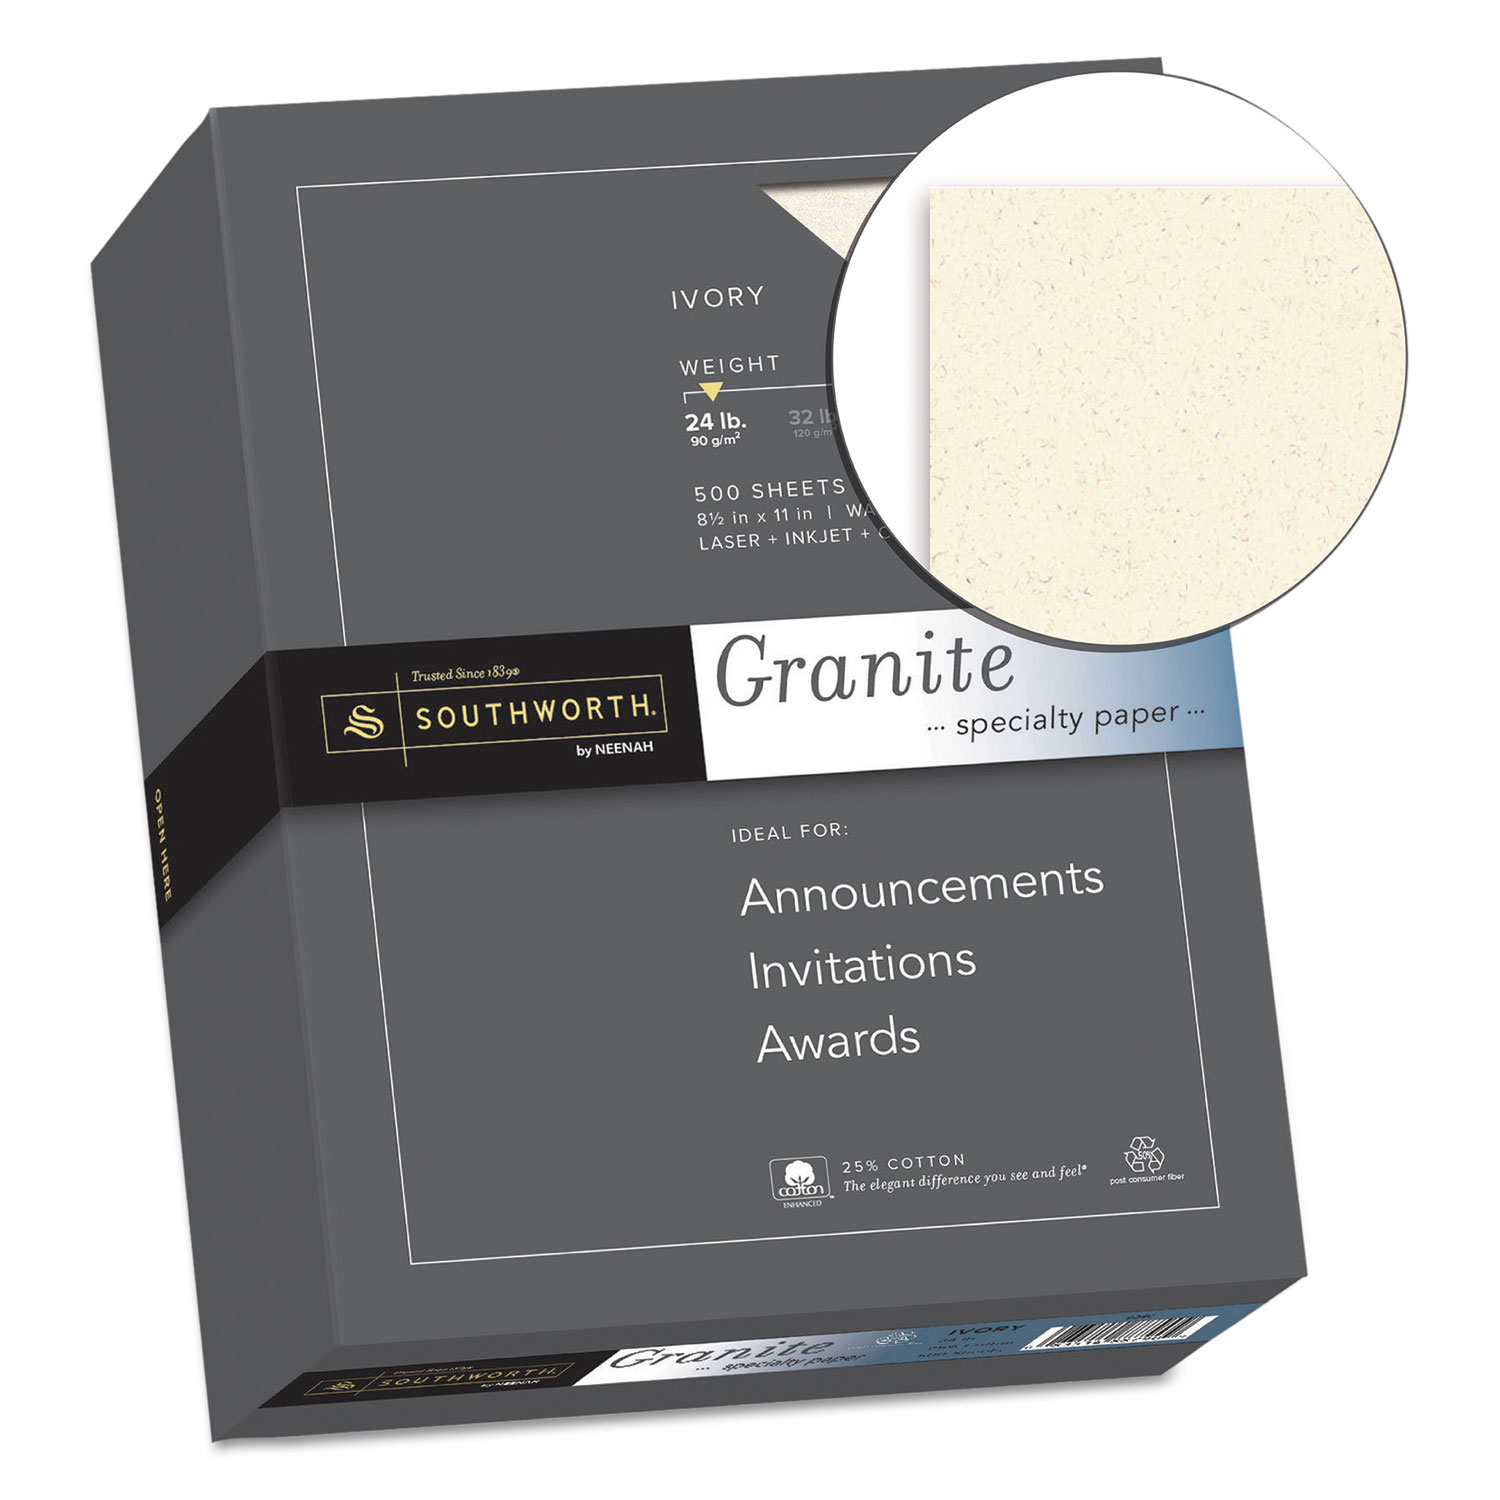 Granite Specialty Paper, Ivory, 24lb, 8 1/2 x 11, 25% Cotton, 500 Sheets